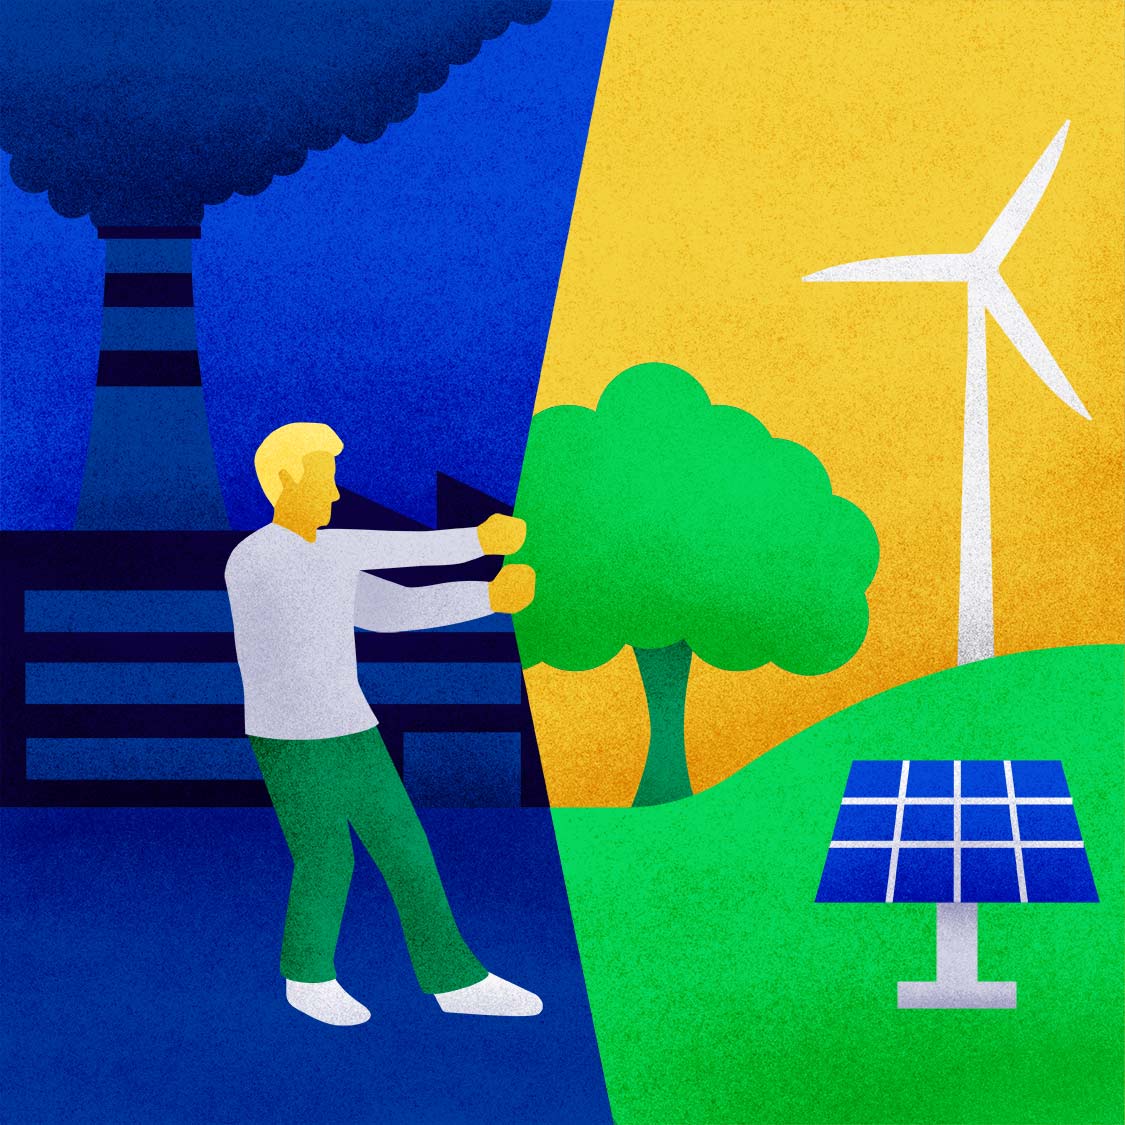 Discover more about the energy transition and what it means for net zero